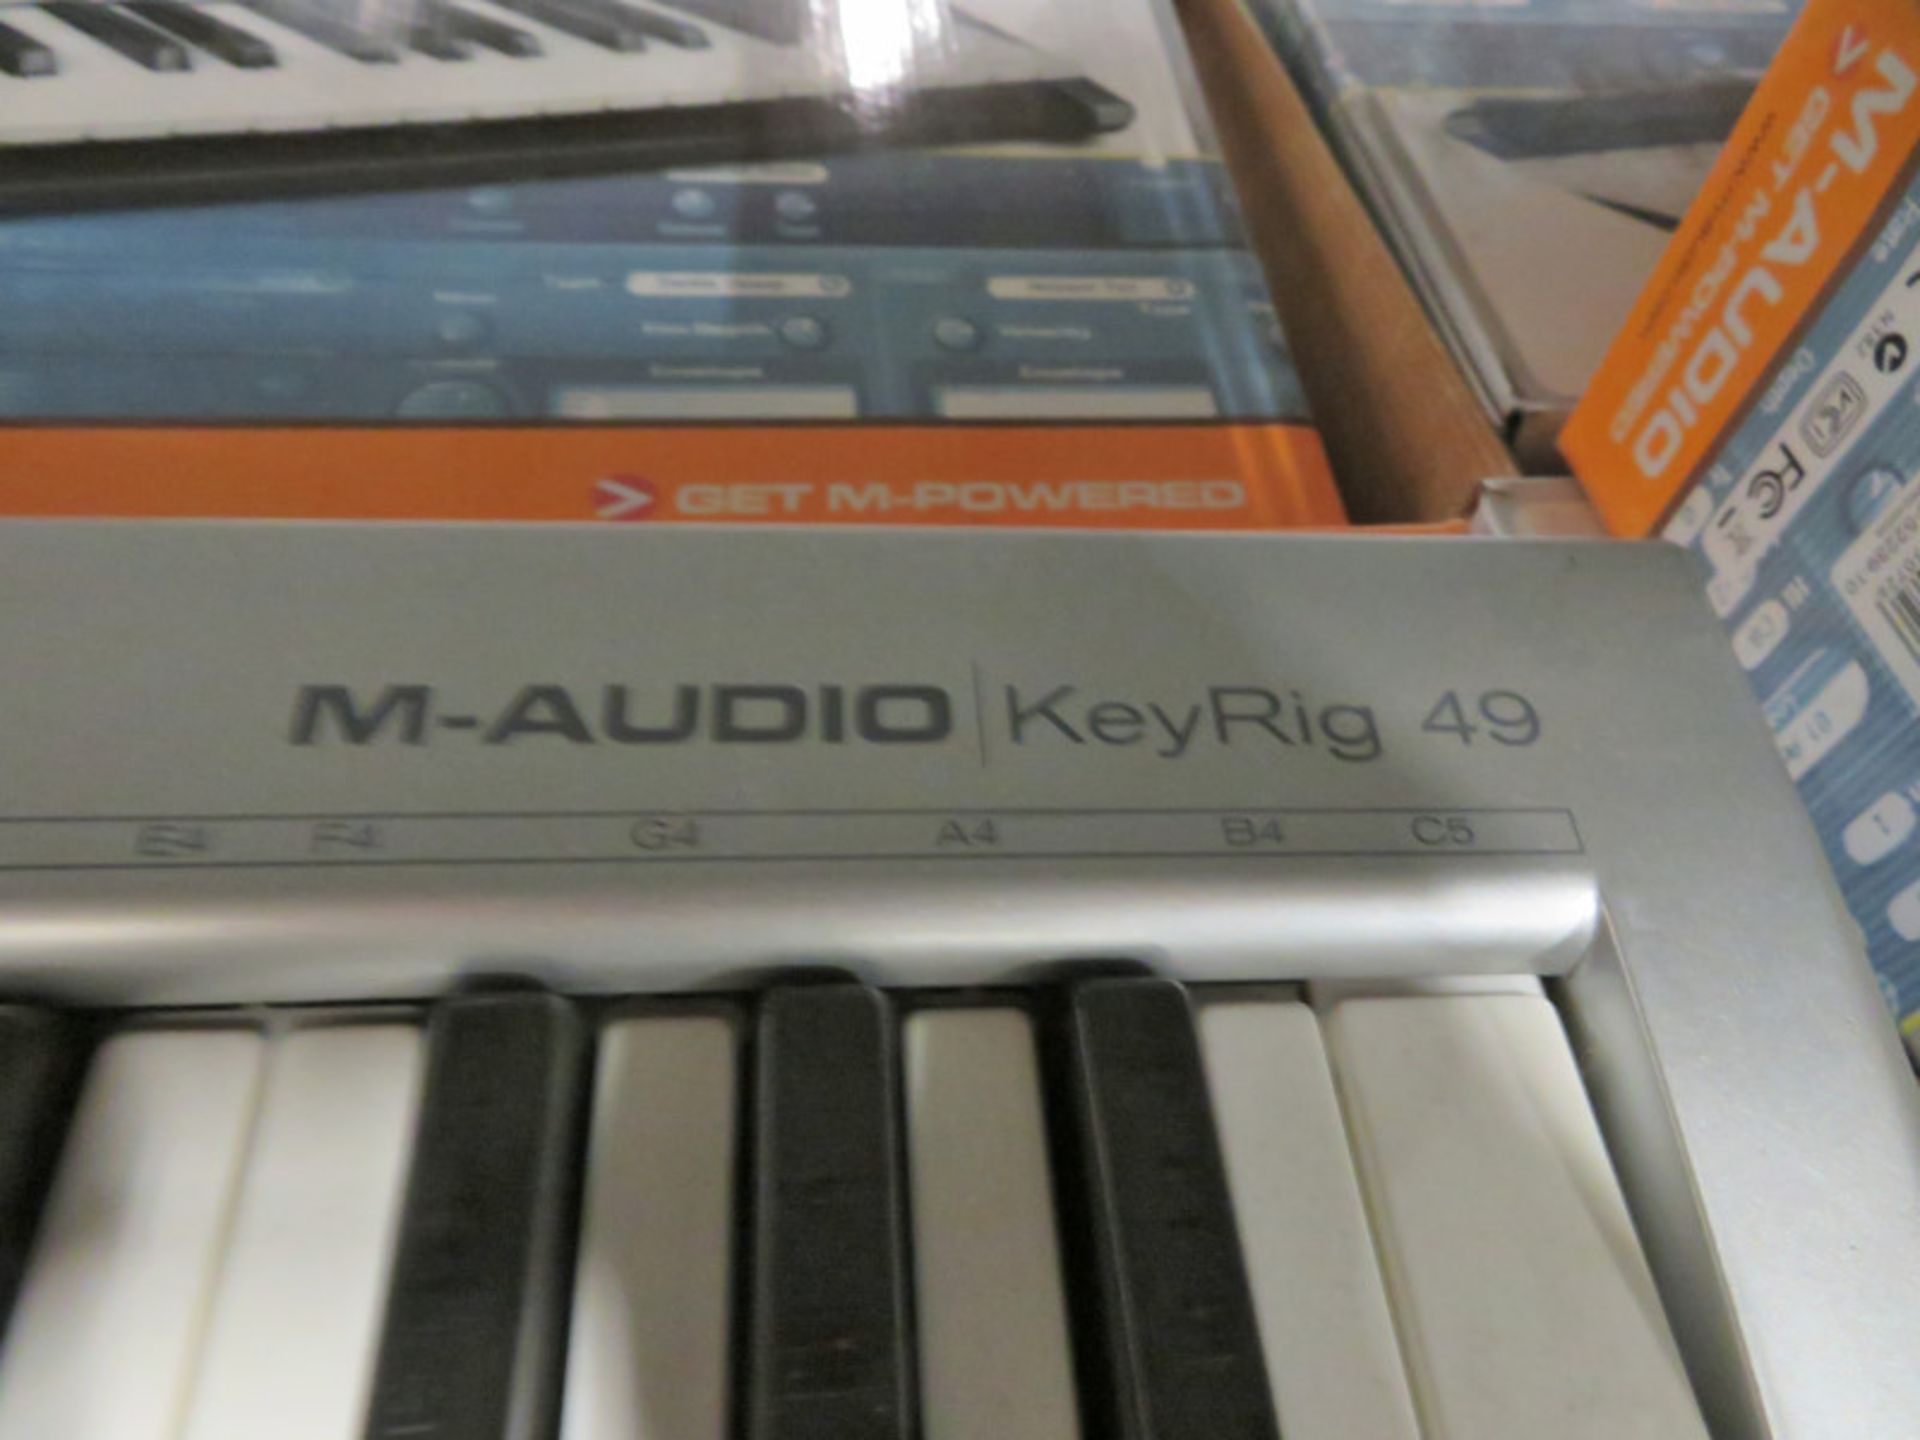 3x M-Audio KeyRig 49 Note Synth-Action USB Keyboards (1 without Box) - Image 3 of 3